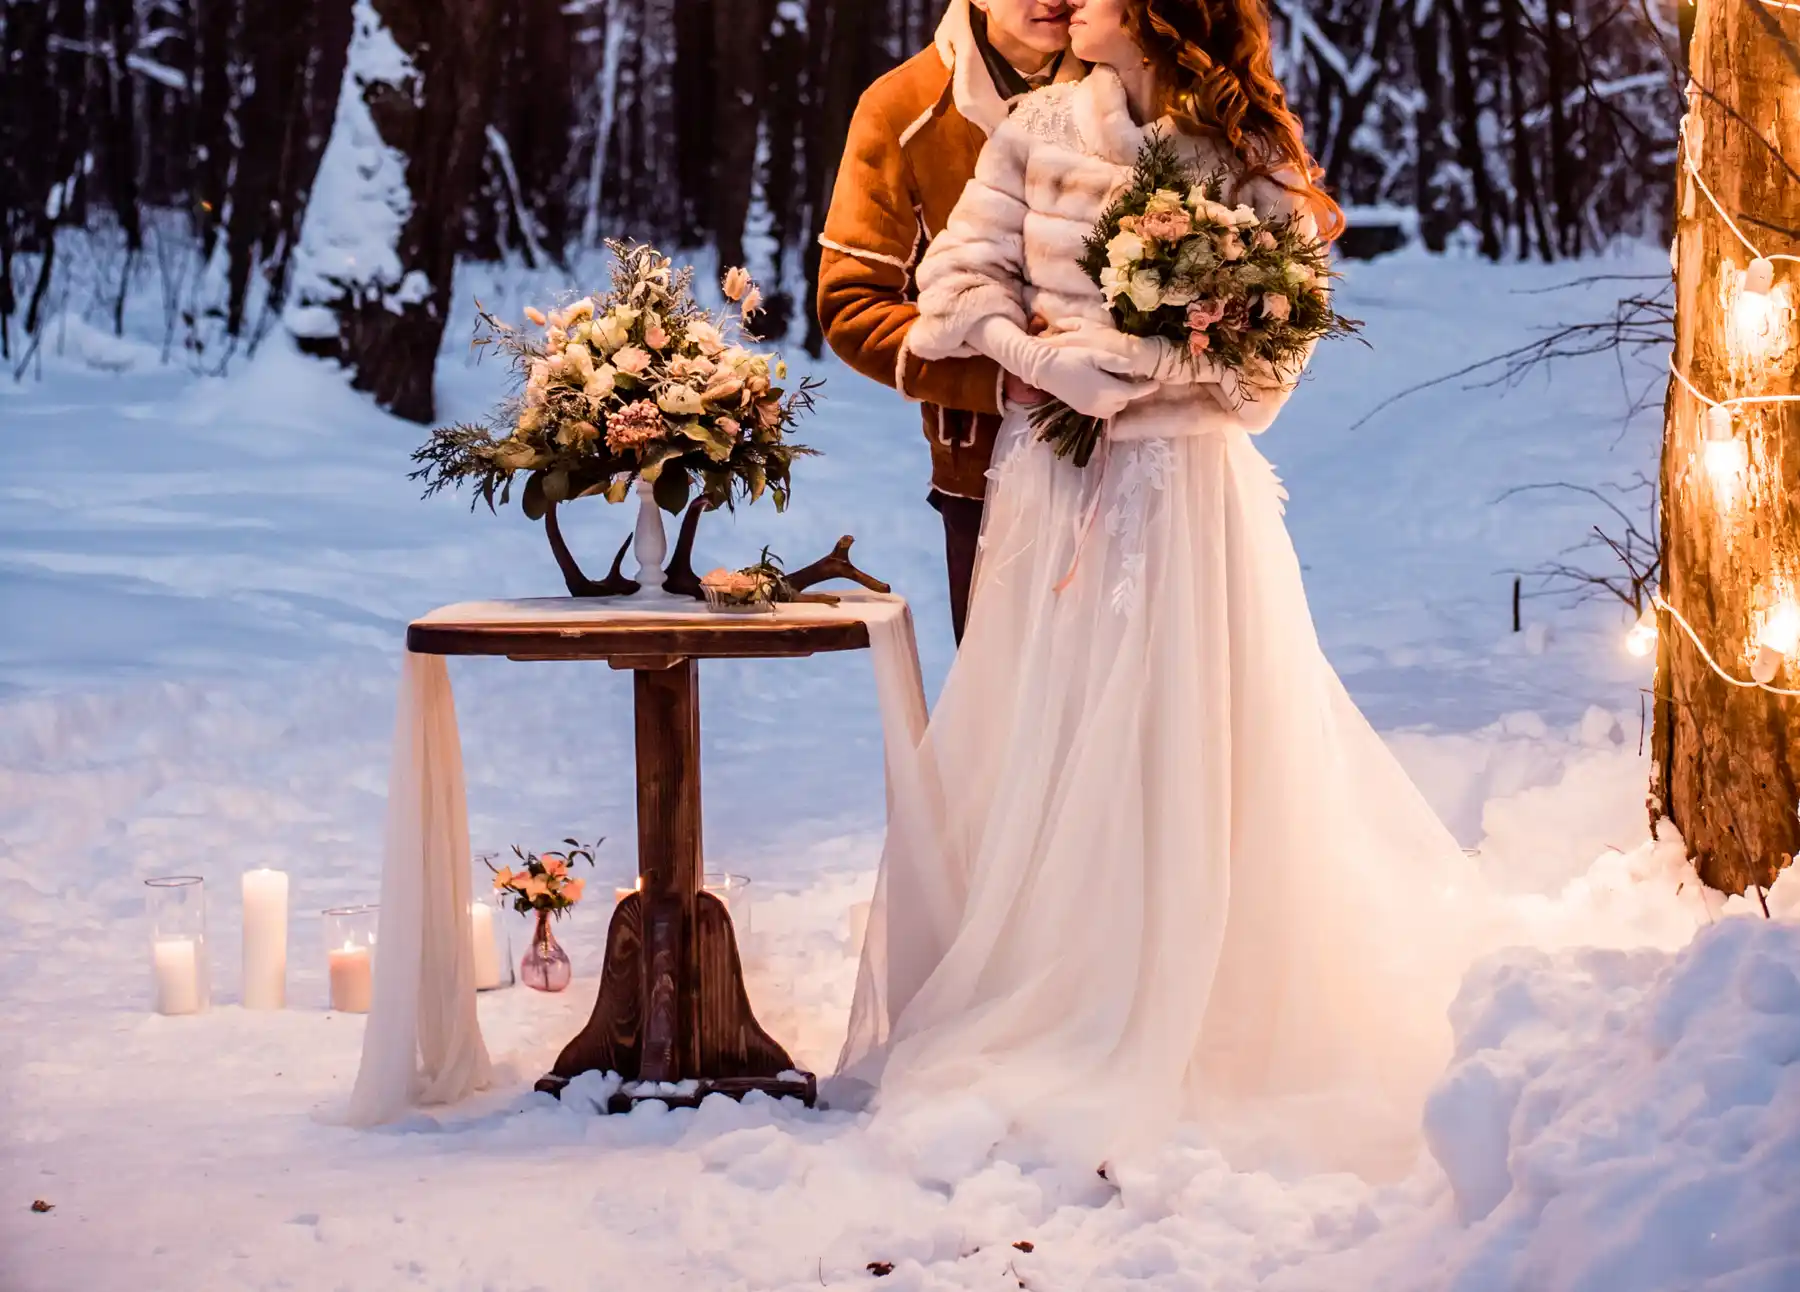 Winter Wedding Ideas With Wow Factor For 2020 Direct Sparklers